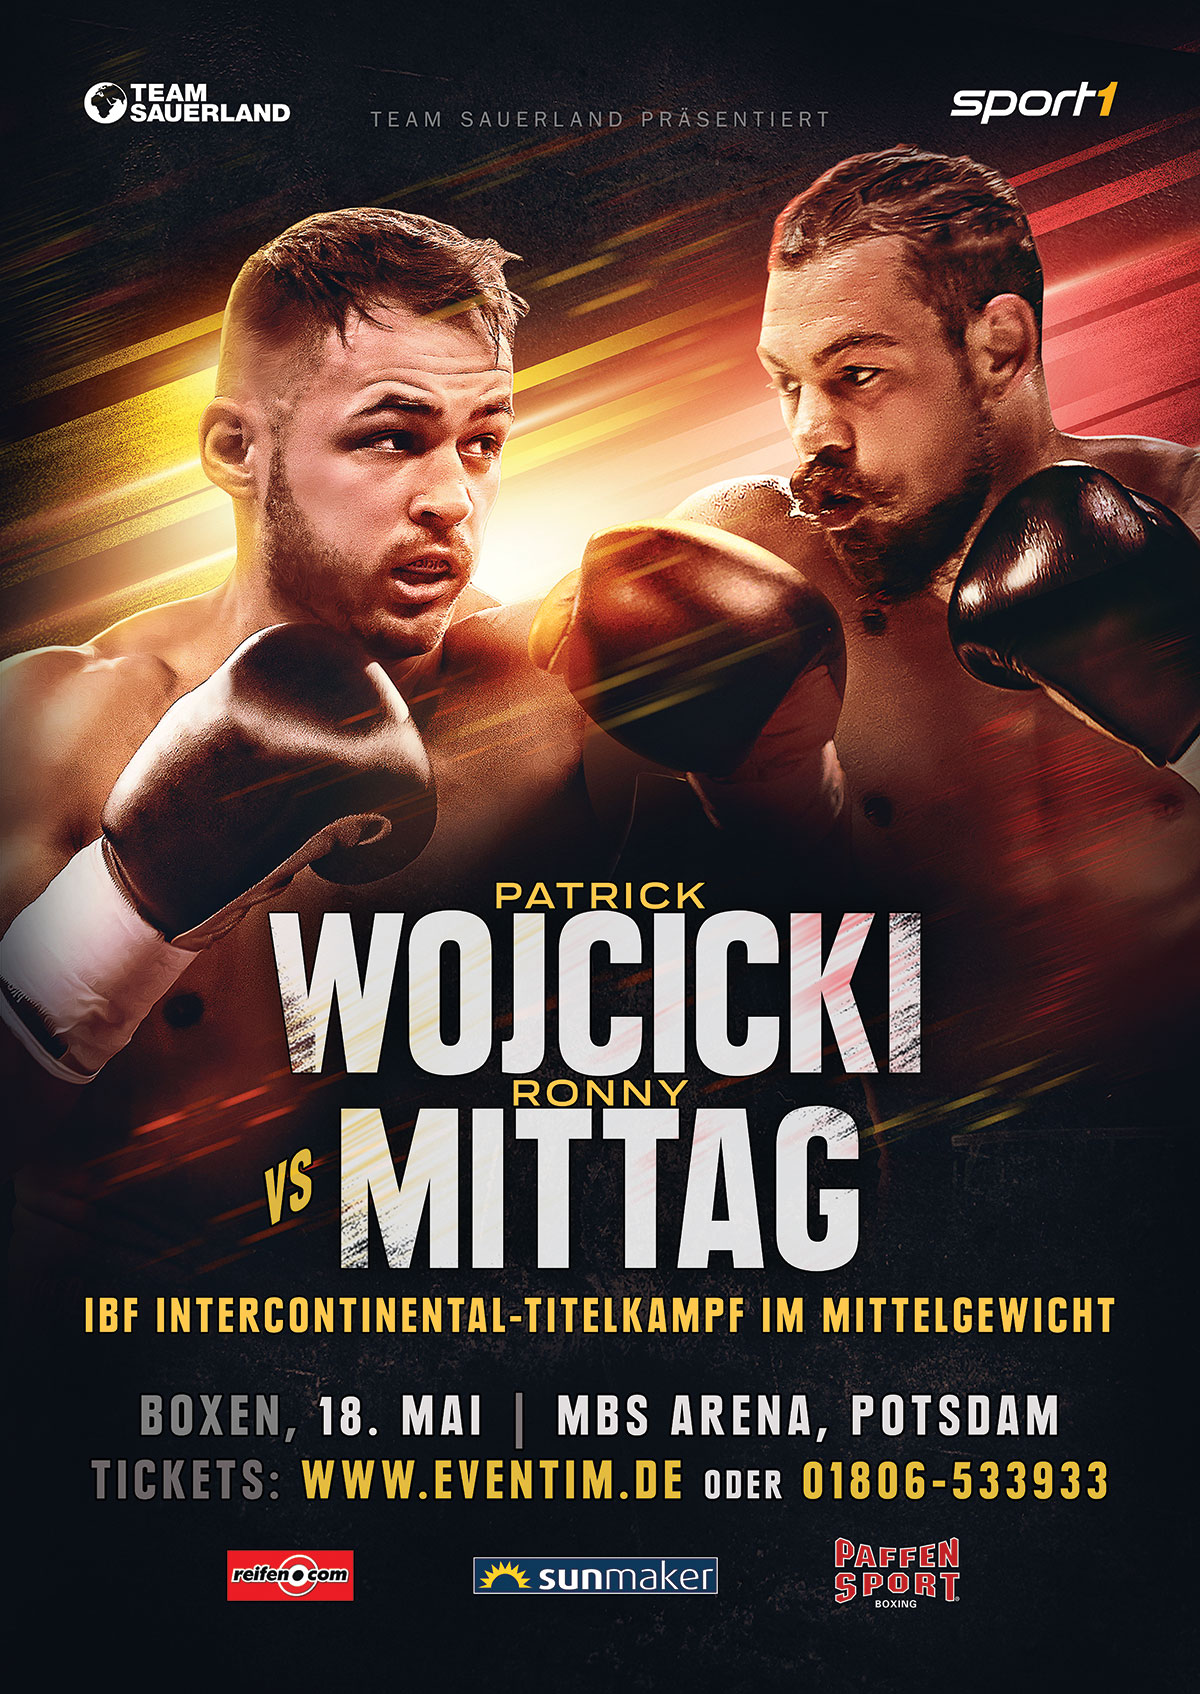 poster for Patrick Wojcicki's fight against Ronny Mittag in Potsdam, Germany